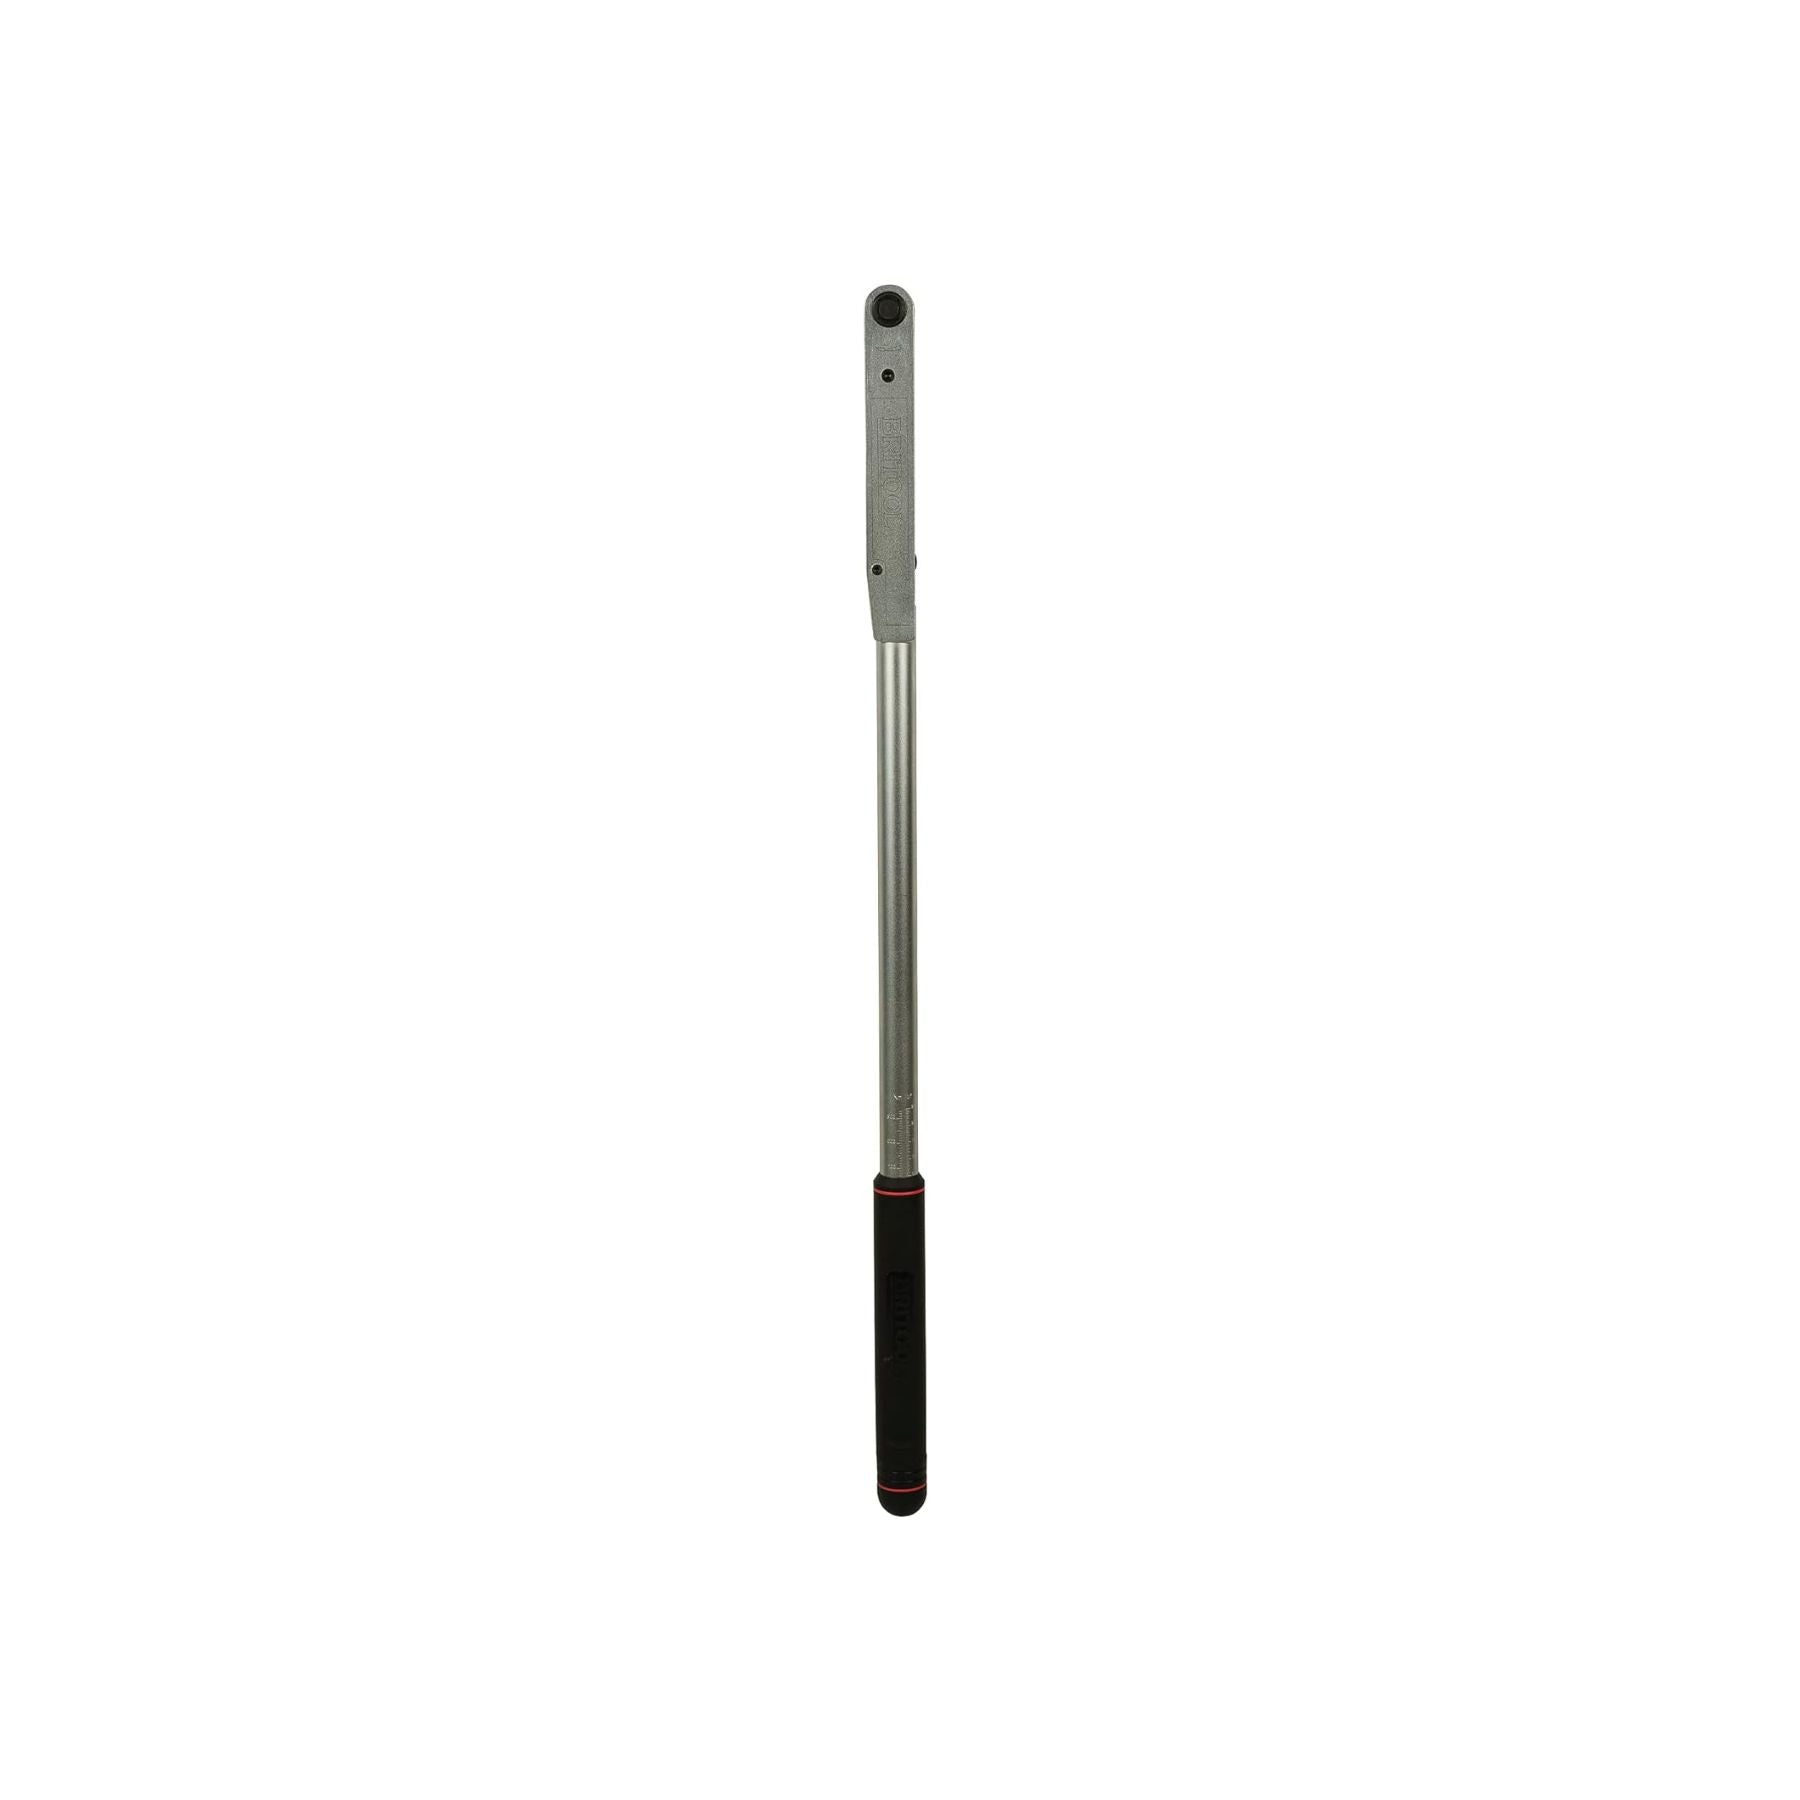 BRITOOL (EVT3000A) 1/2" SQ DR TORQUE WRENCH (70-330NM)